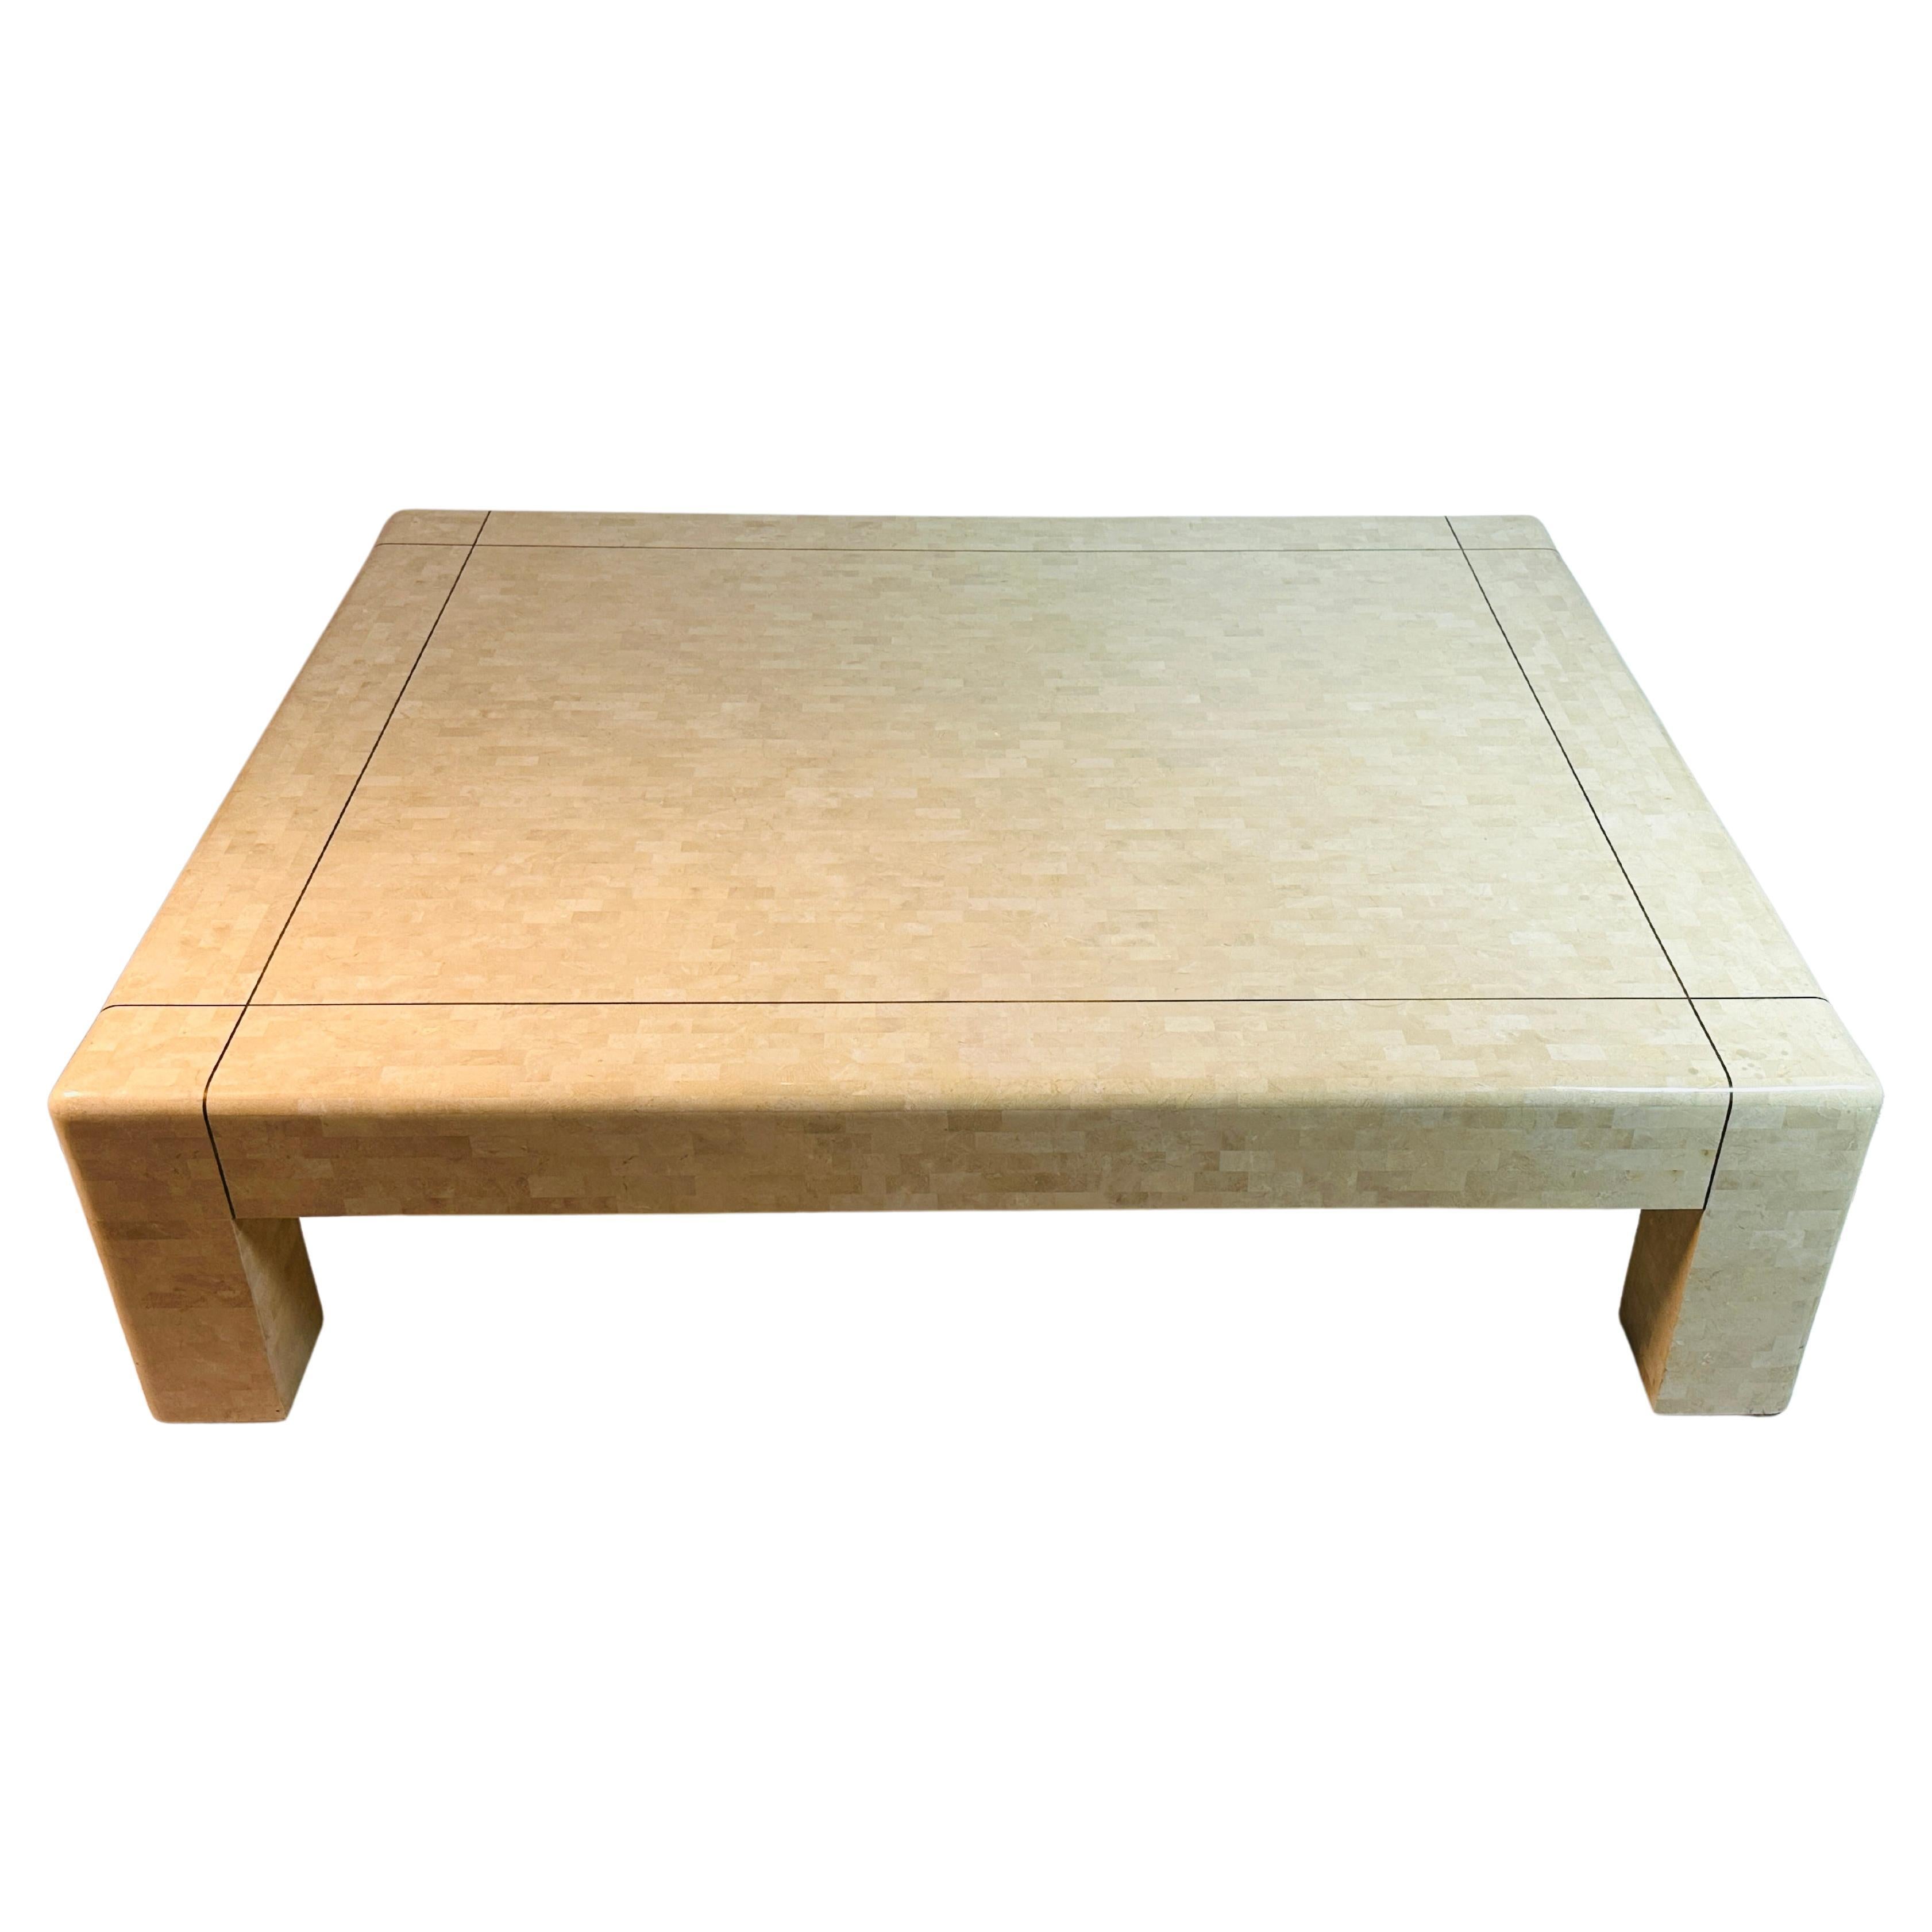 Mid-Century Modern Monumental Coffee Table in Tessellated Stone & Brass by Karl Springer, Signed For Sale